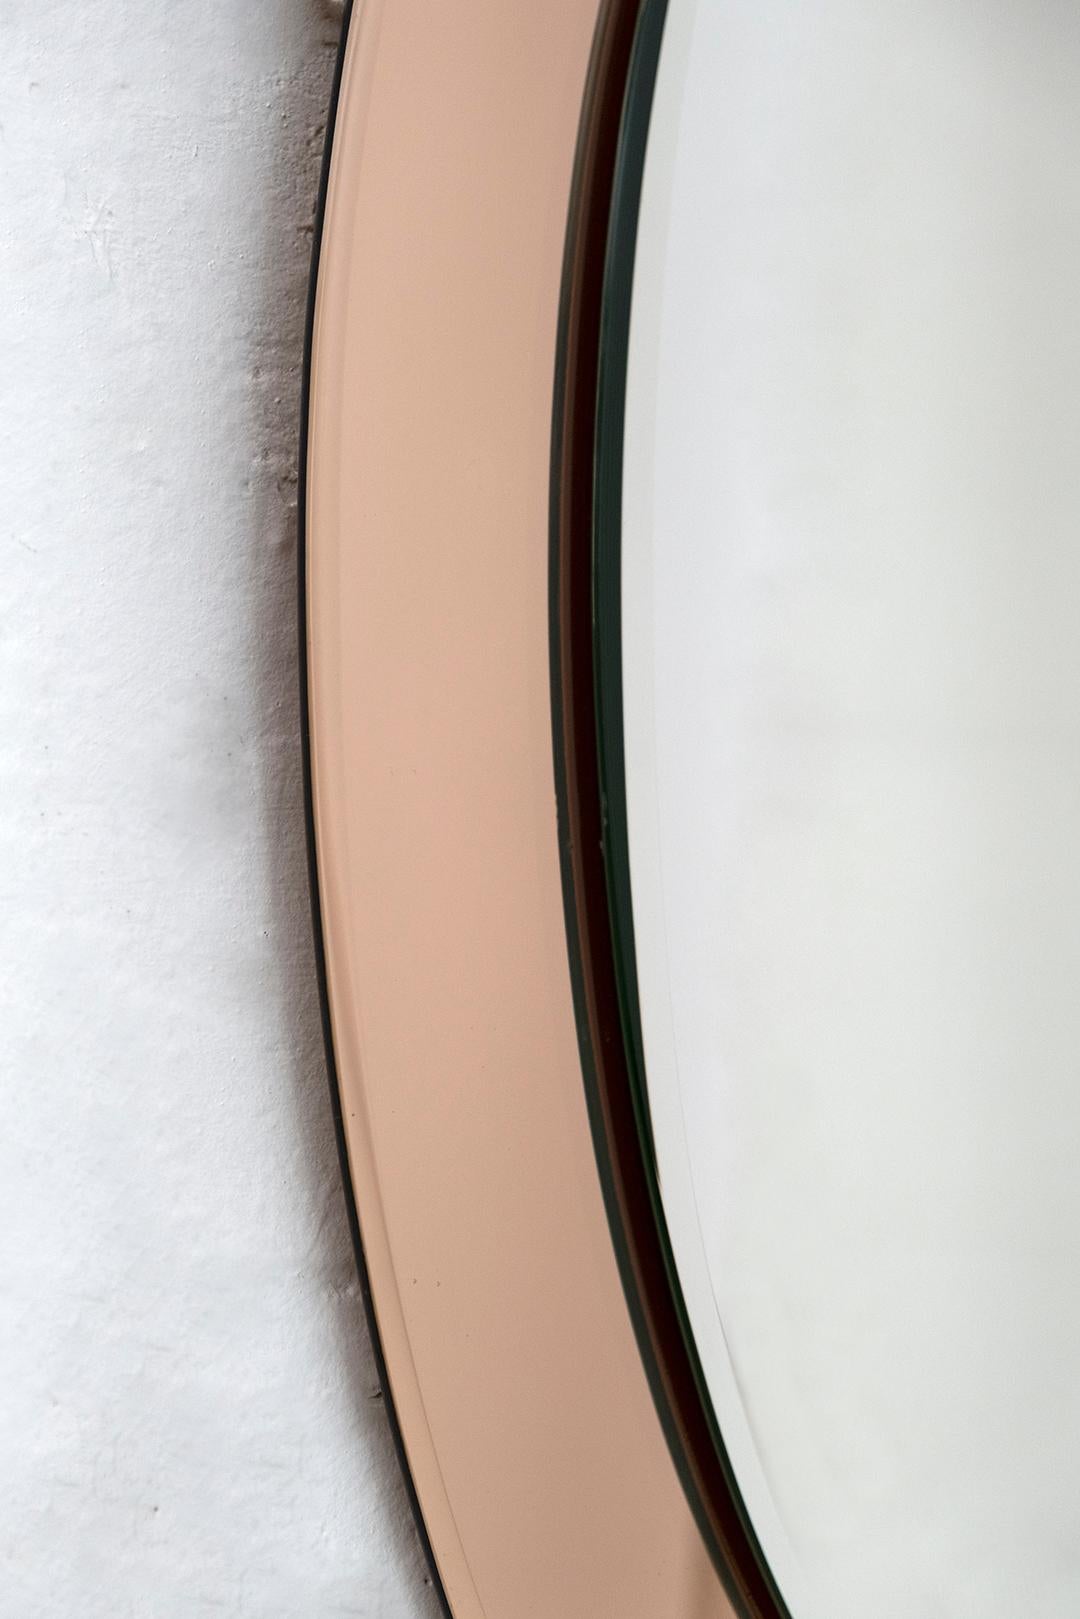 This mirror was designed and produced by Antonio Lupi for Cristal Luxor.
As shown in the photo, it has two scratches on the surrounding frame, in the upper part.

Antonio Lupi was born in Vinci in Italy in 1932 and at the age of 18 he began the